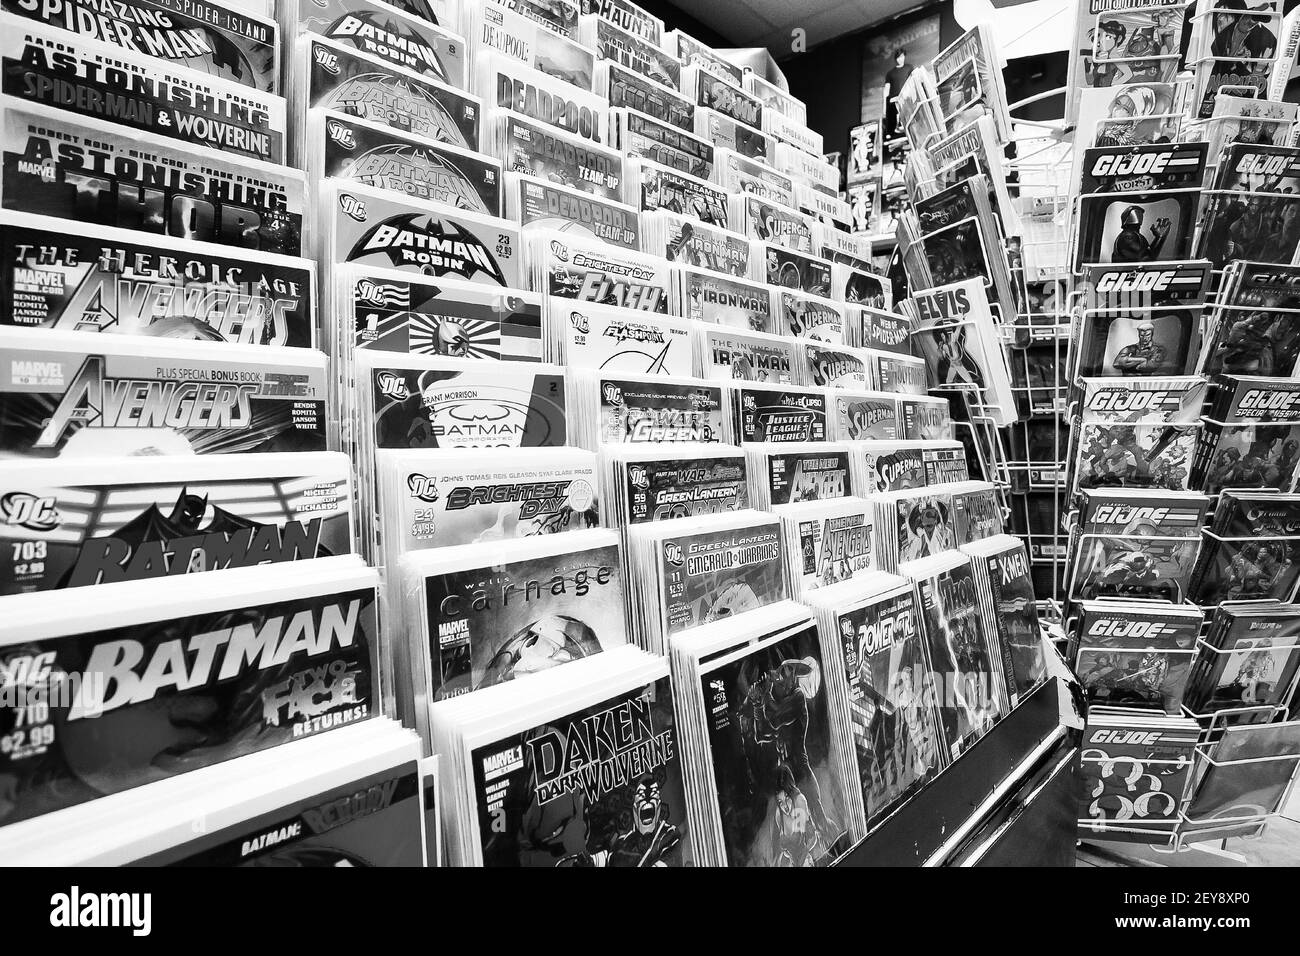 JOHANNESBURG, SOUTH AFRICA - Jan 06, 2021: Johannesburg, South Africa - July 05 2011: Inside interior of a Comic Book Store Stock Photo